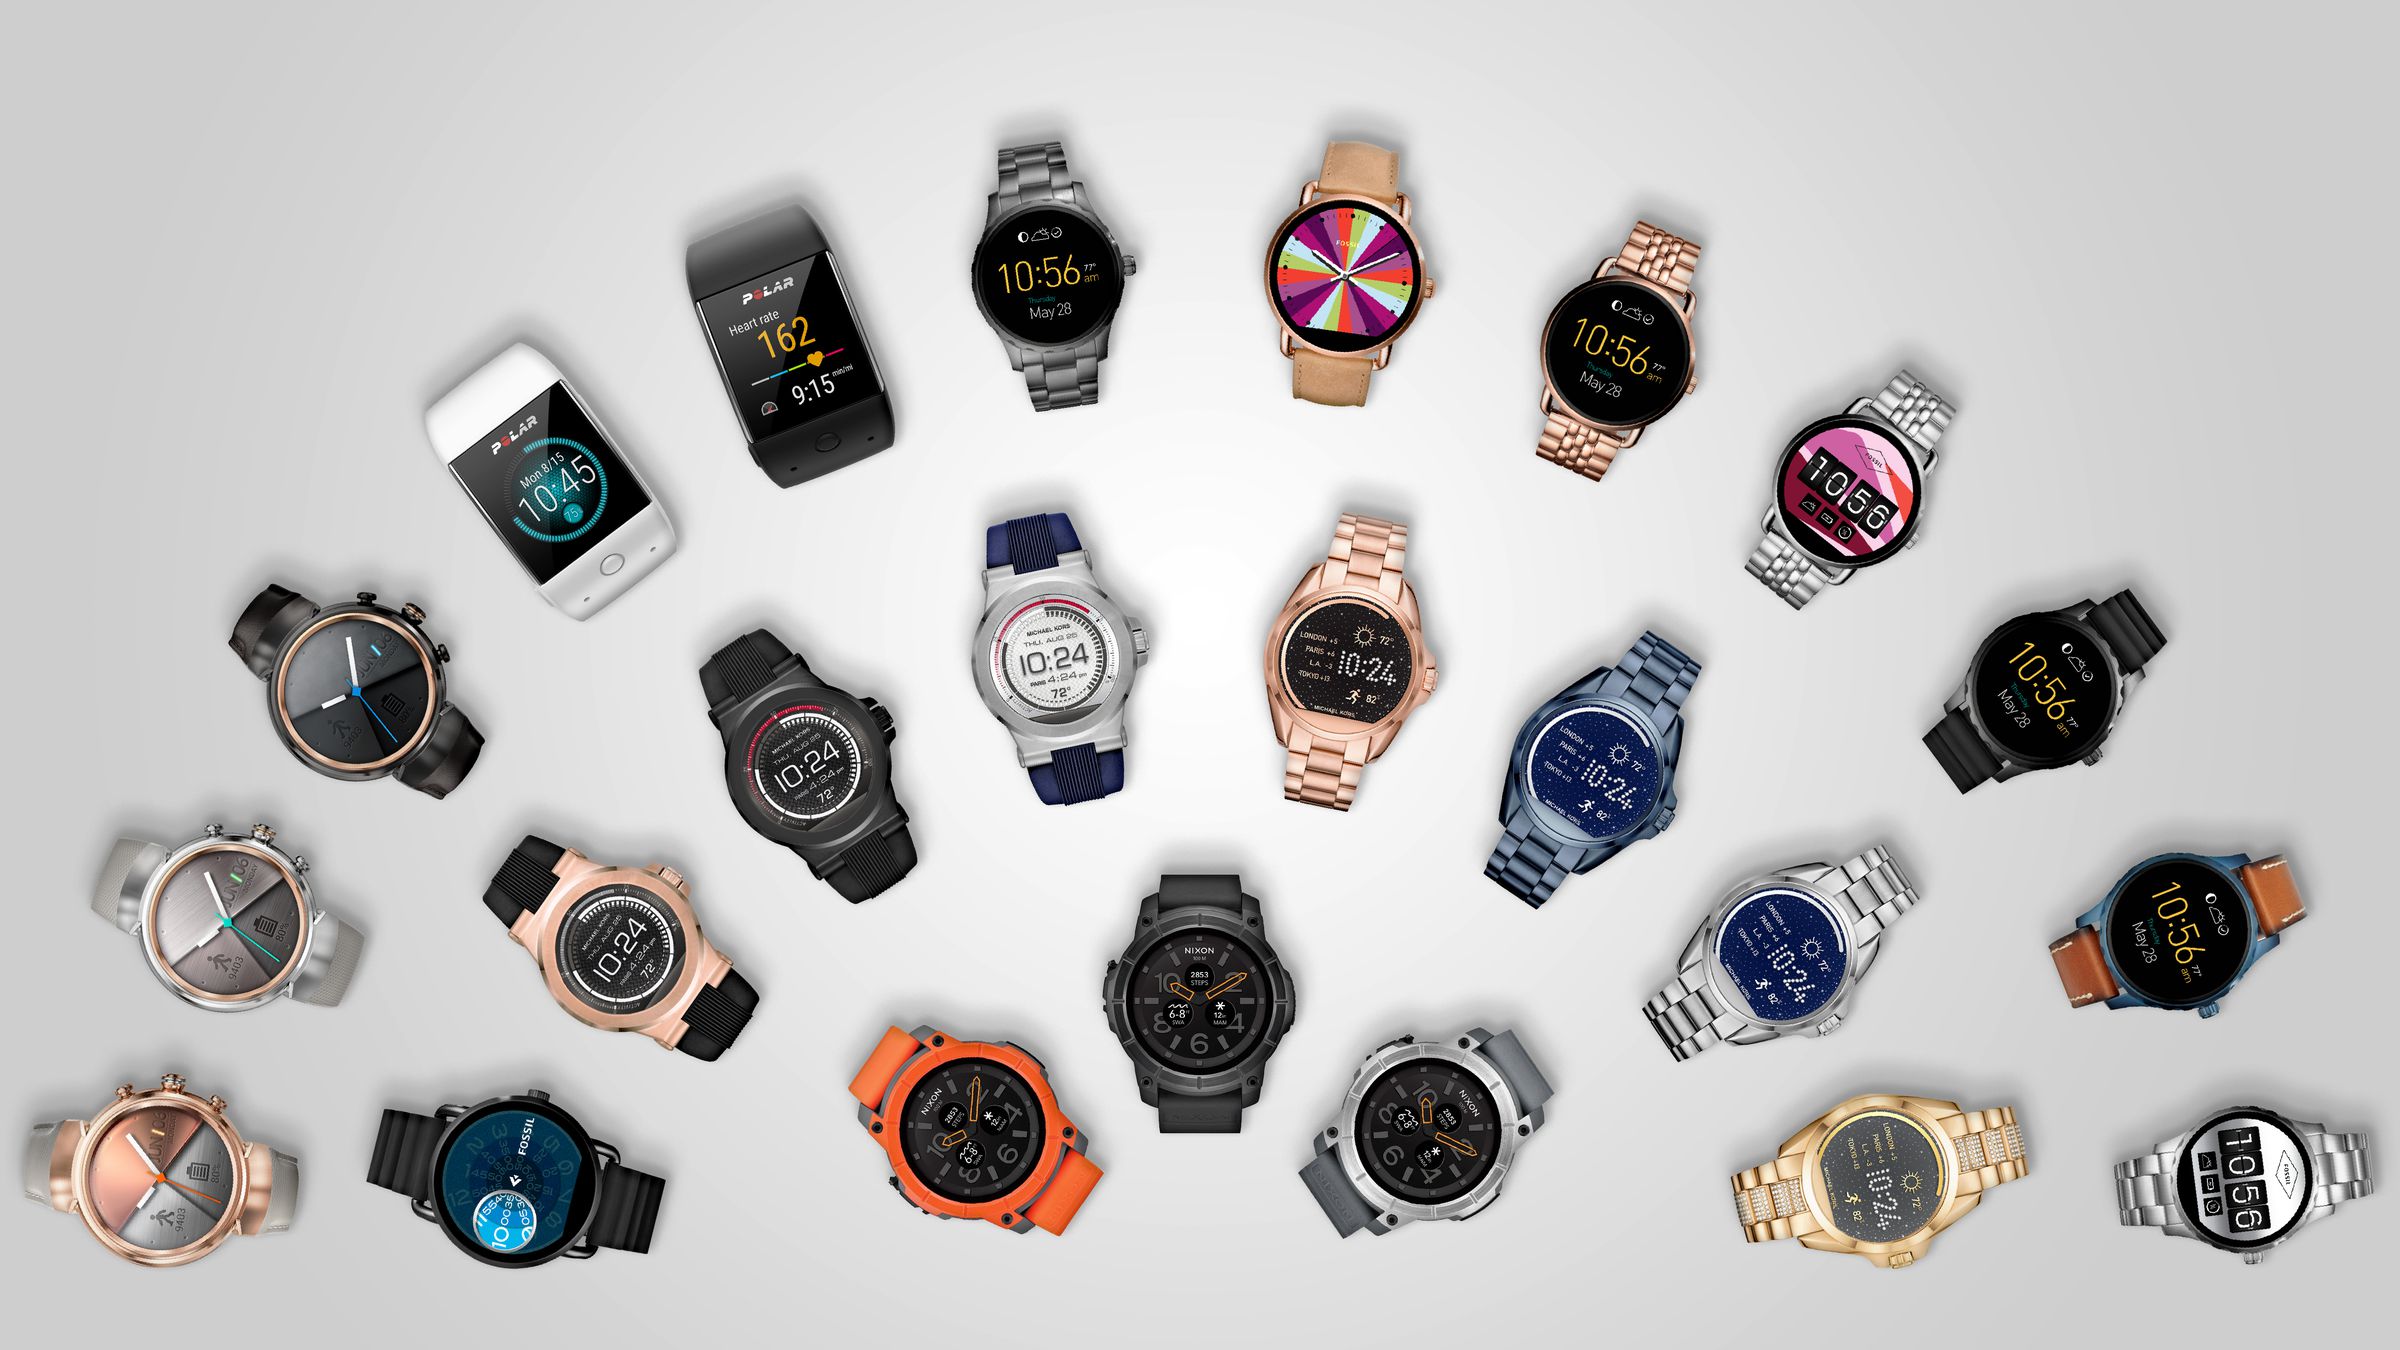 Android Wear devices from Asus, Fossil, Michael Kors, Nixon, and Polar that launched this fall